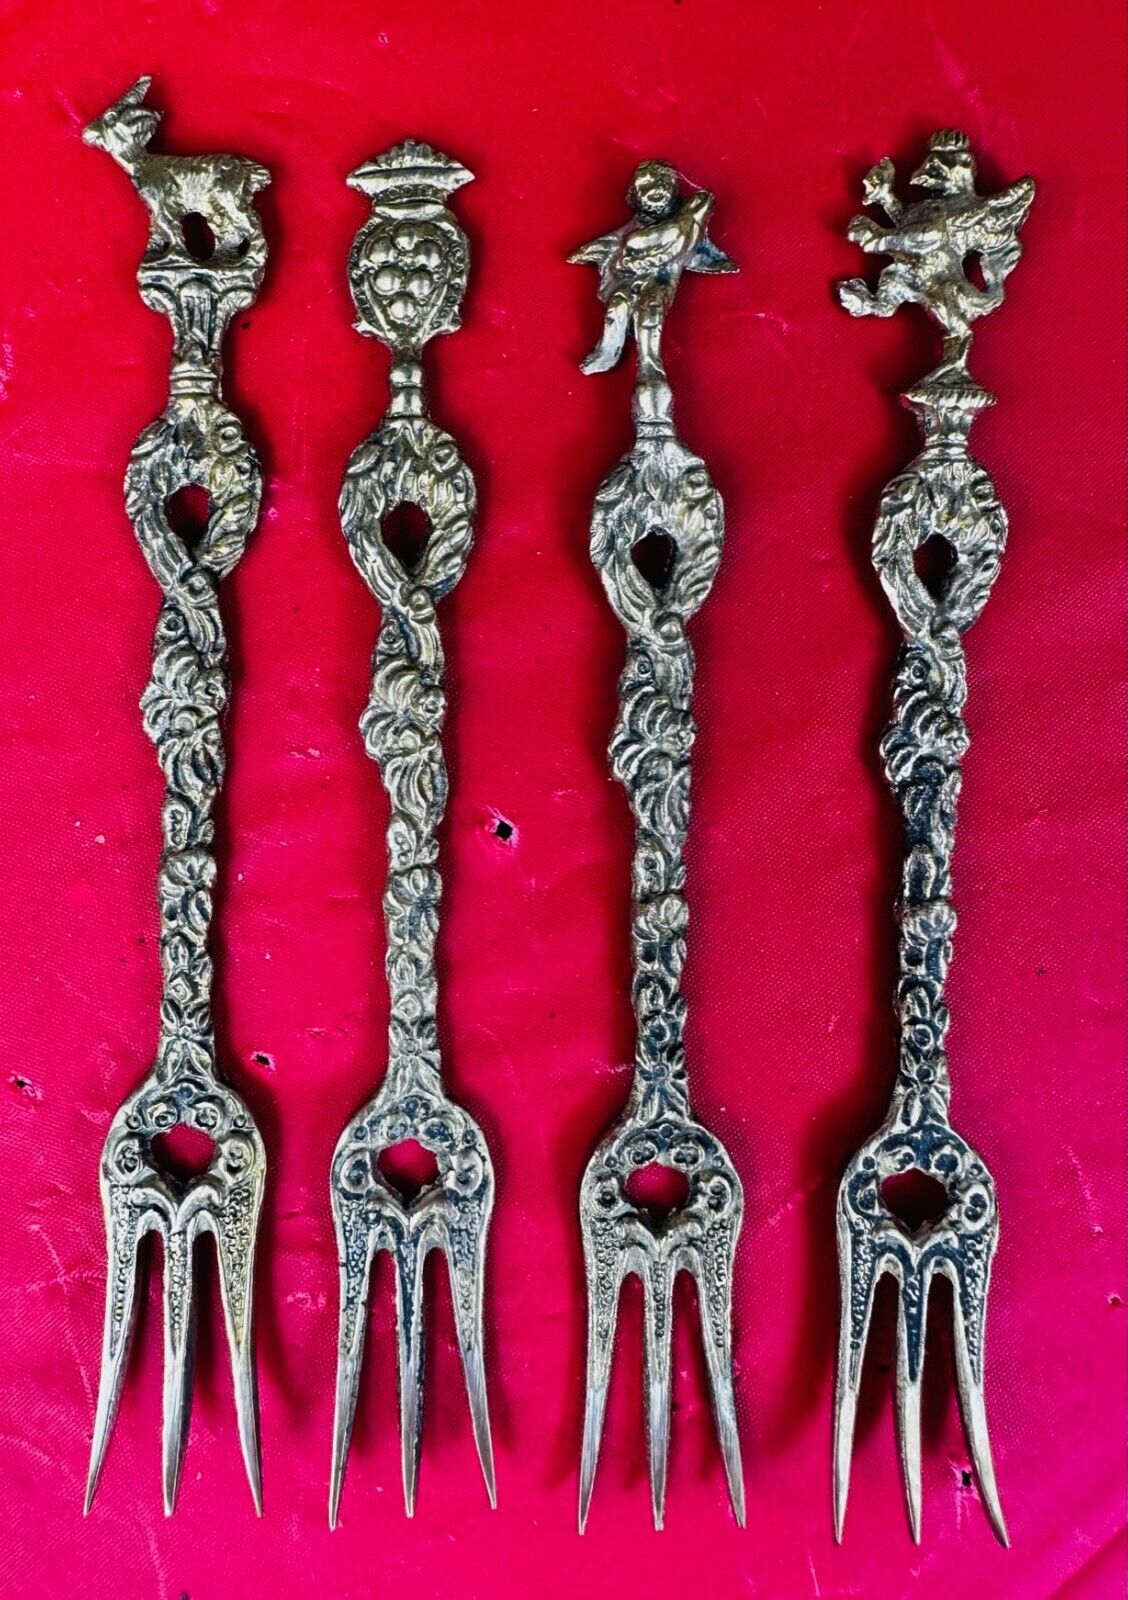 4 Antique Italy Olive Hors d' Oeuvre Forks Italy Goat Cherub Griffin